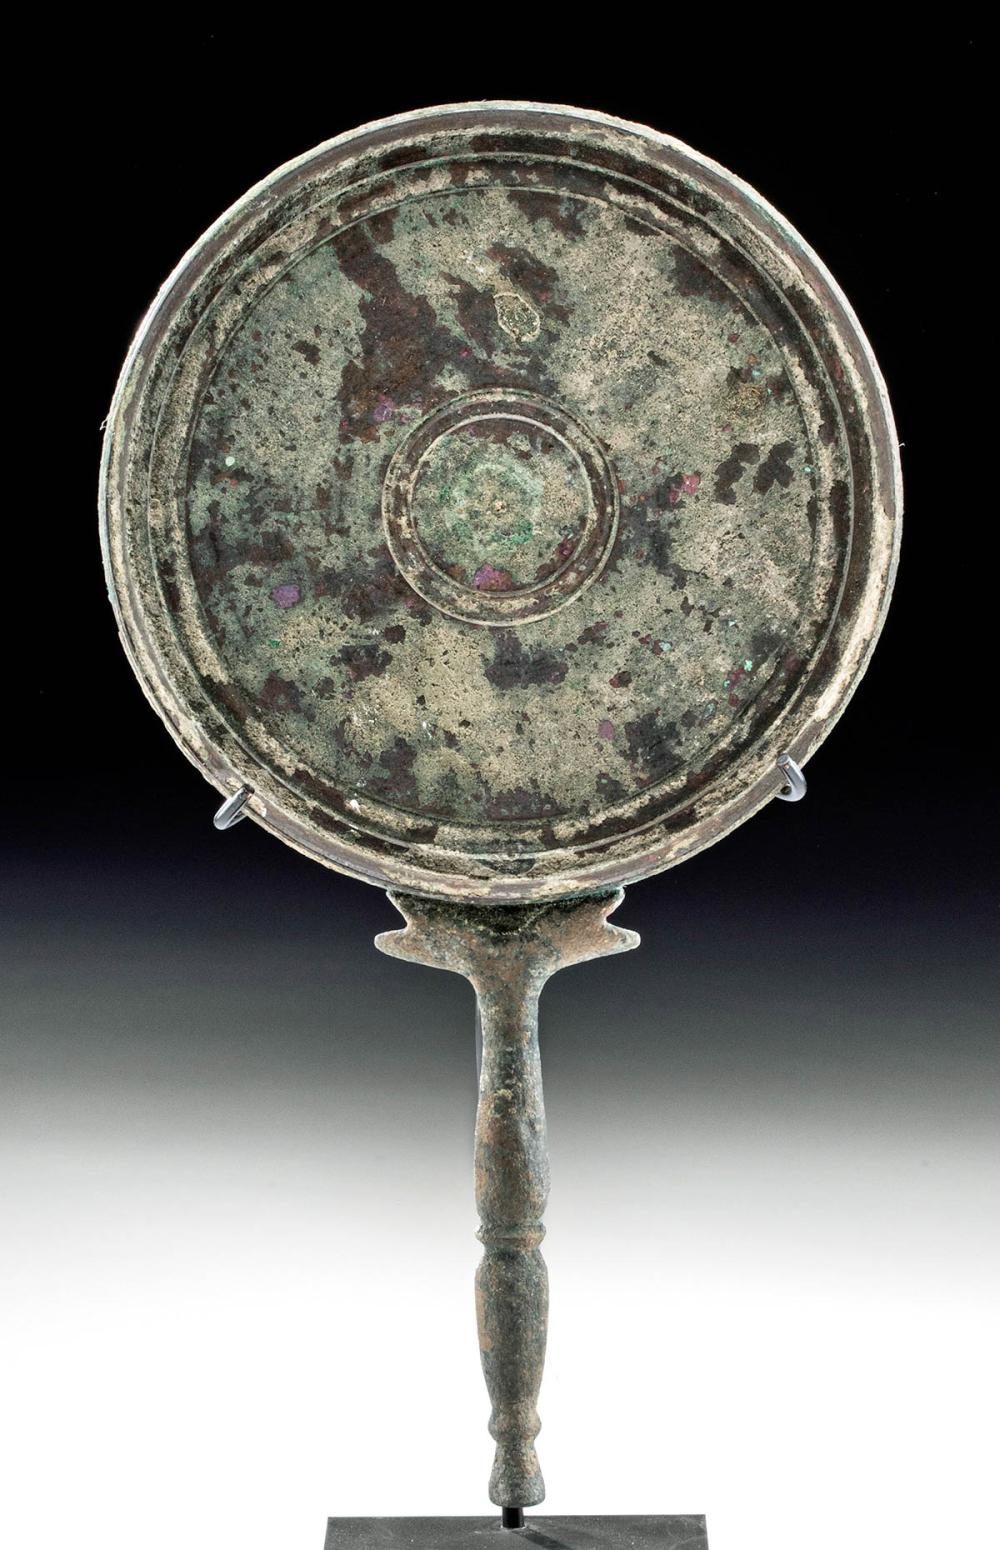 An ancient mirror stand made of metal